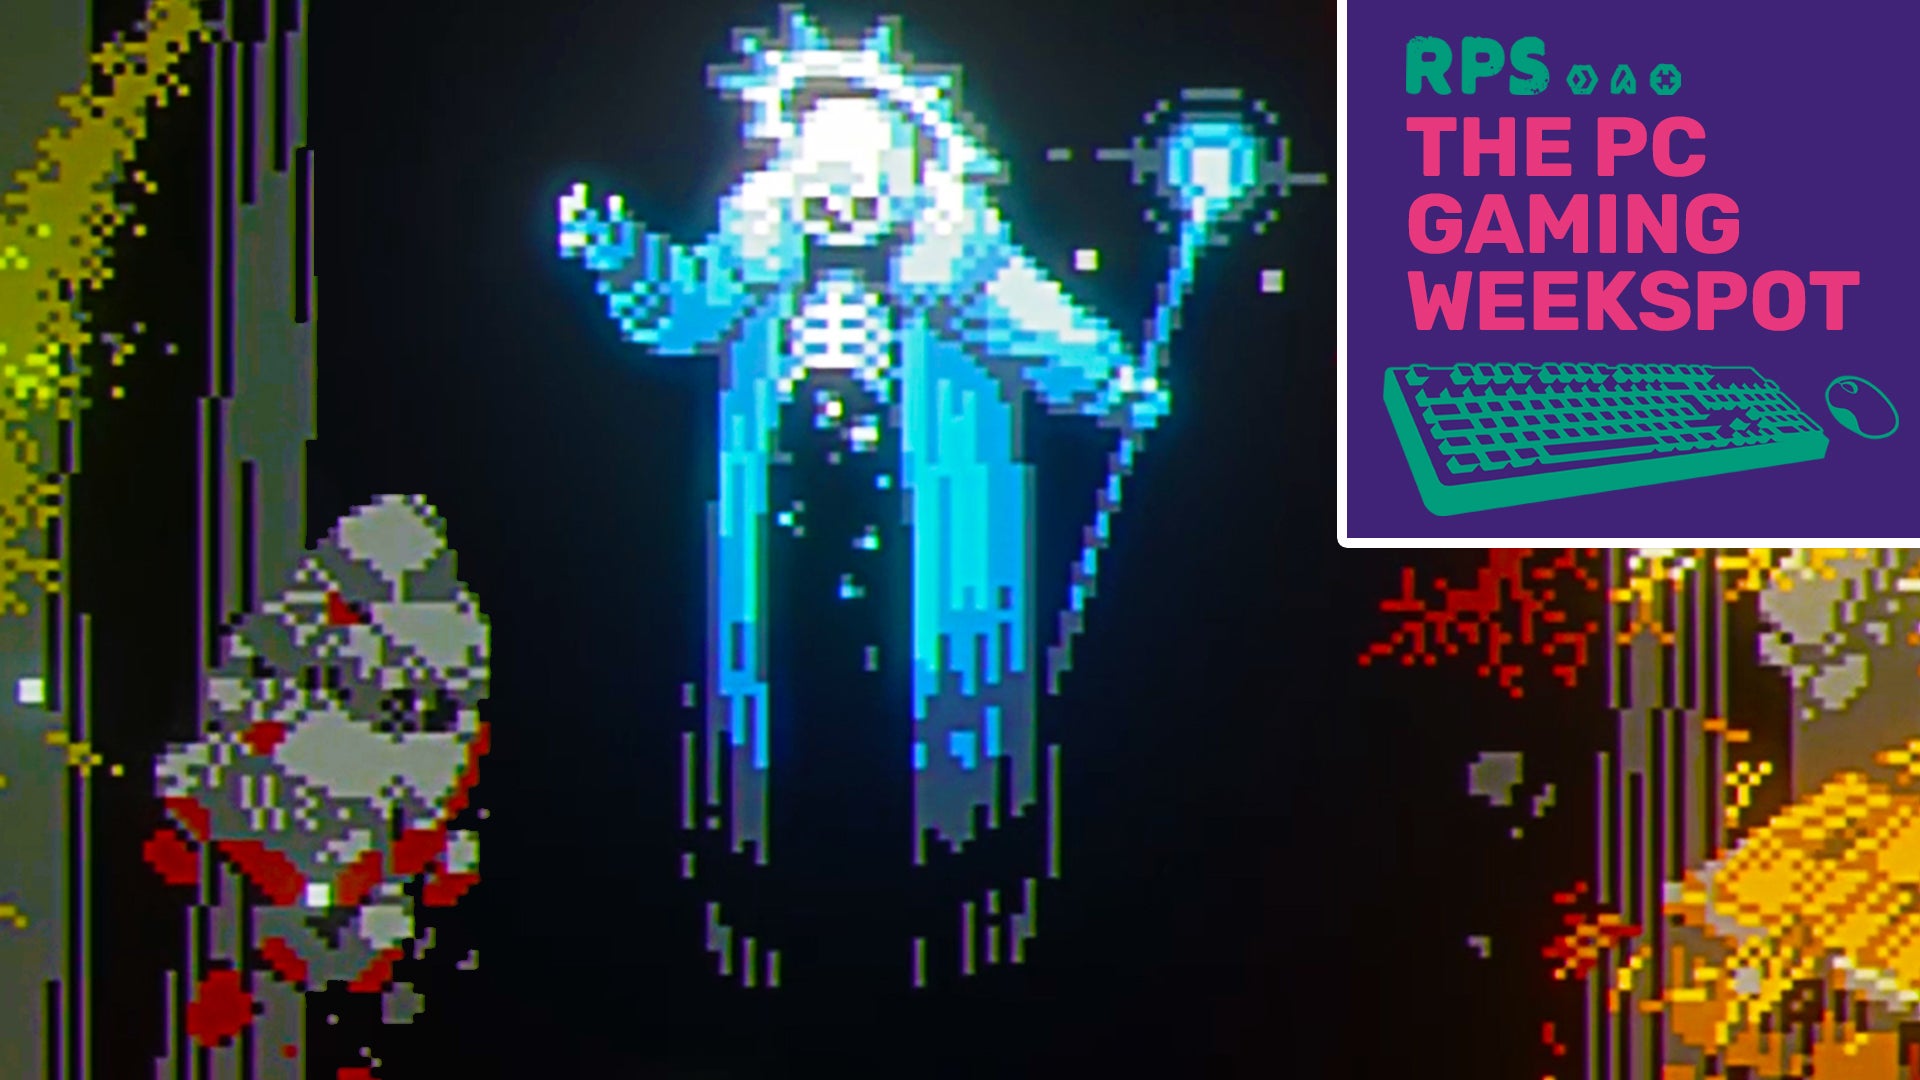 The Lich from video game Loop Hero levitating in the air, with the logo of The PC Gaming Weekspot podcast in the top right corner